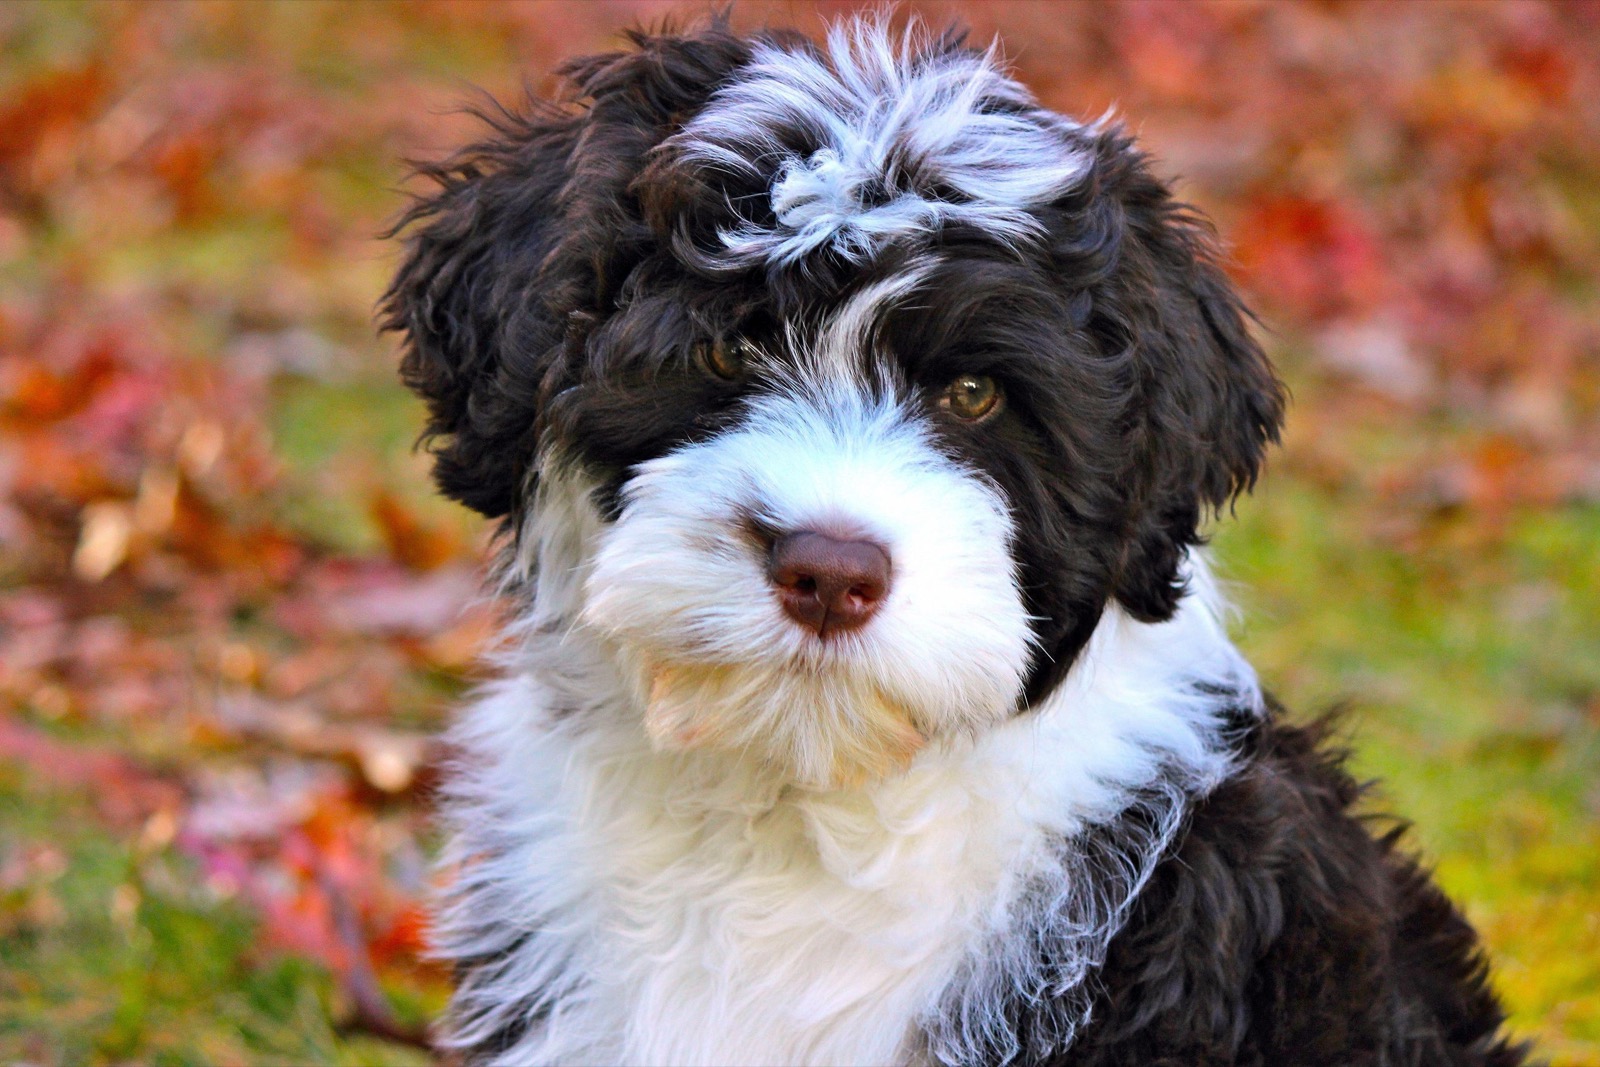 Can You Pass This General Knowledge Quiz While Being Distracted by Cute Puppies? Portuguese Water Dog Puppy